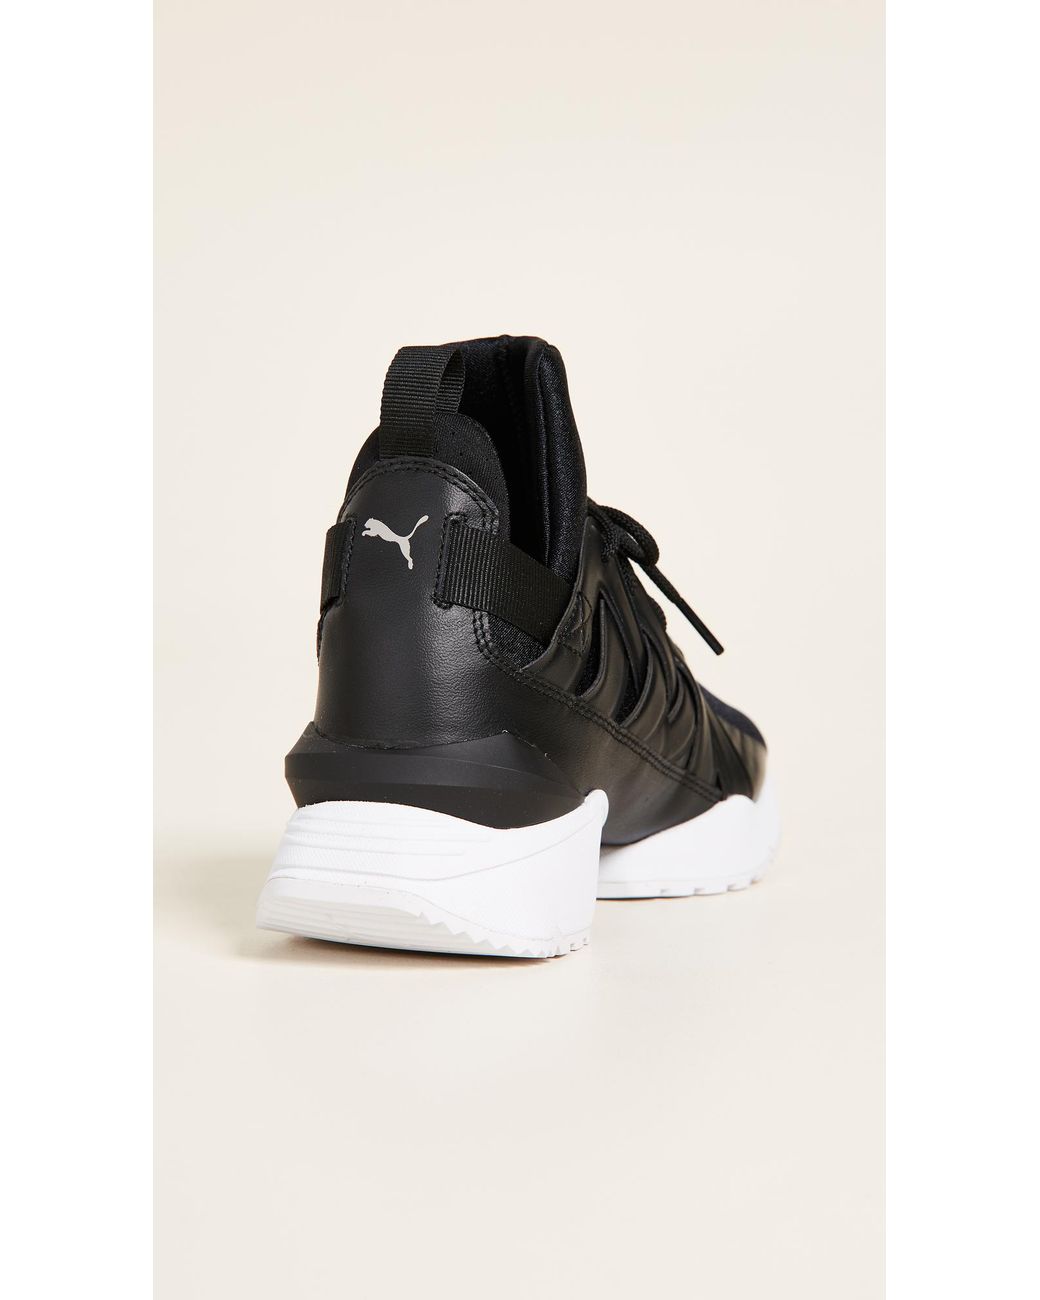 PUMA Muse Echo Satin Ep Sneakers in Black | Lyst